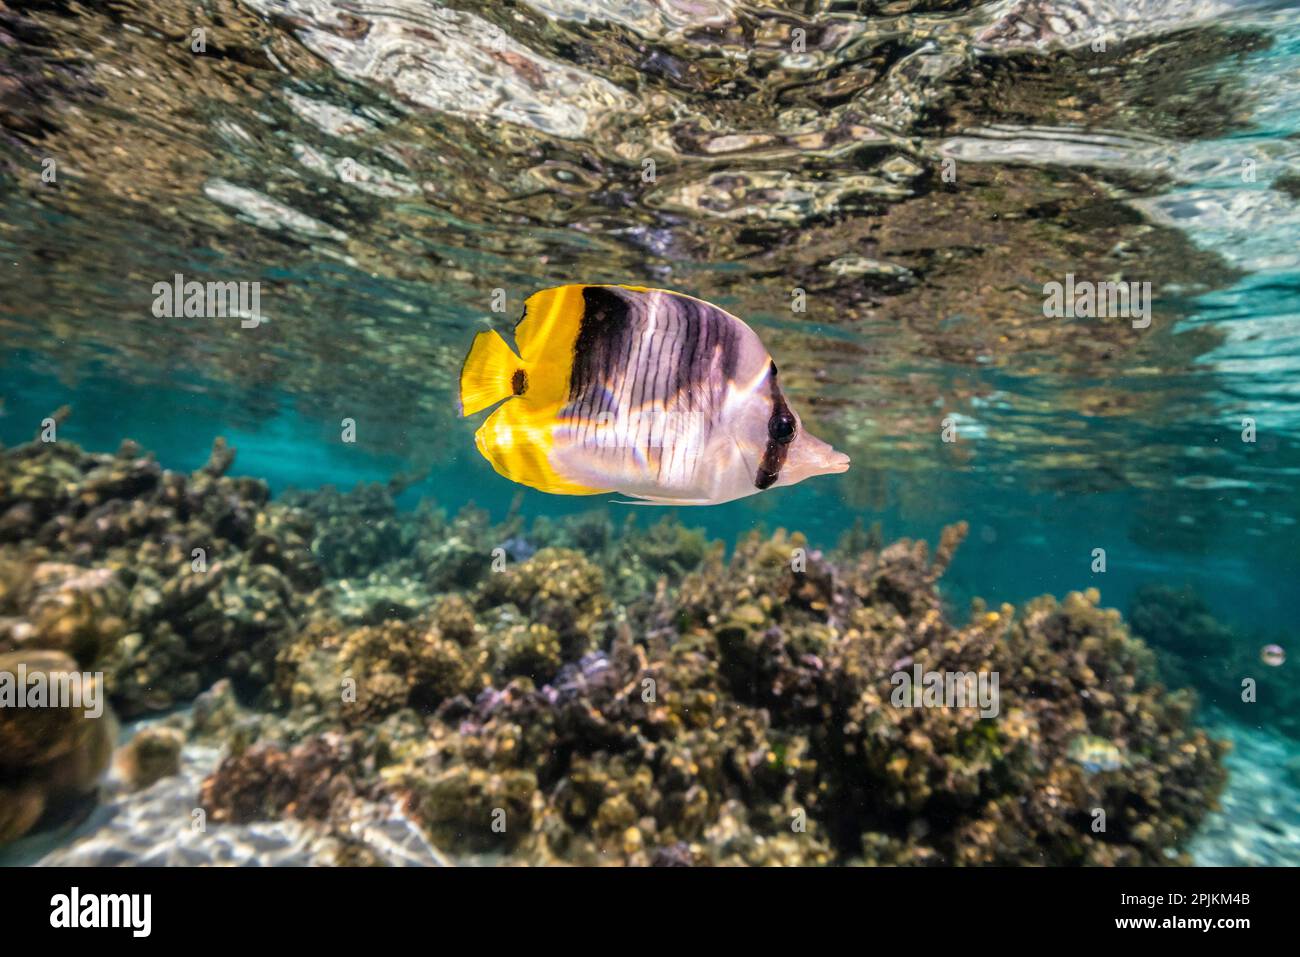 French Polynesia, Taha'a. Coral scenic with lone Pacific double-saddle butterflyfish. Stock Photo